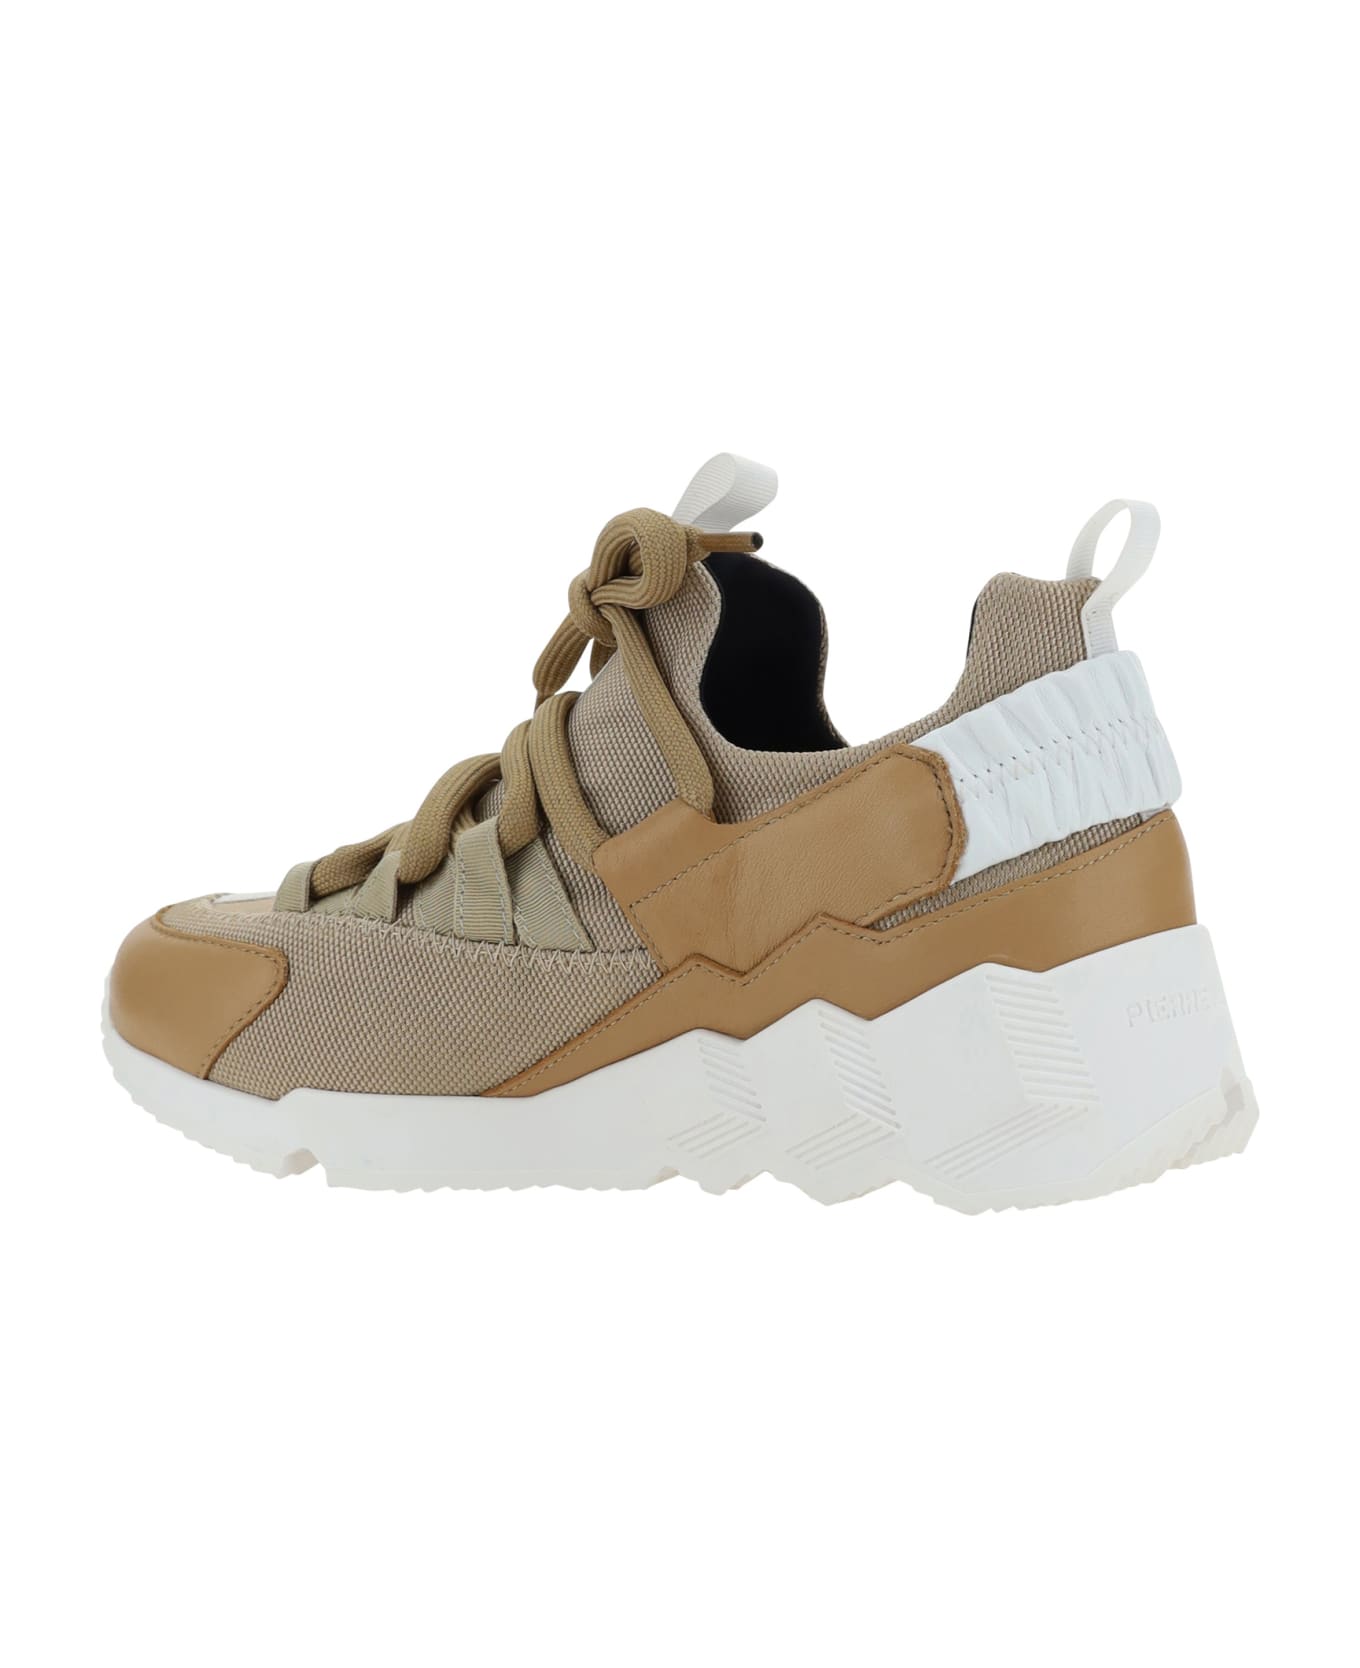 Pierre Hardy Trek Cosmetic Sneakers - Cappuccino/sand/white